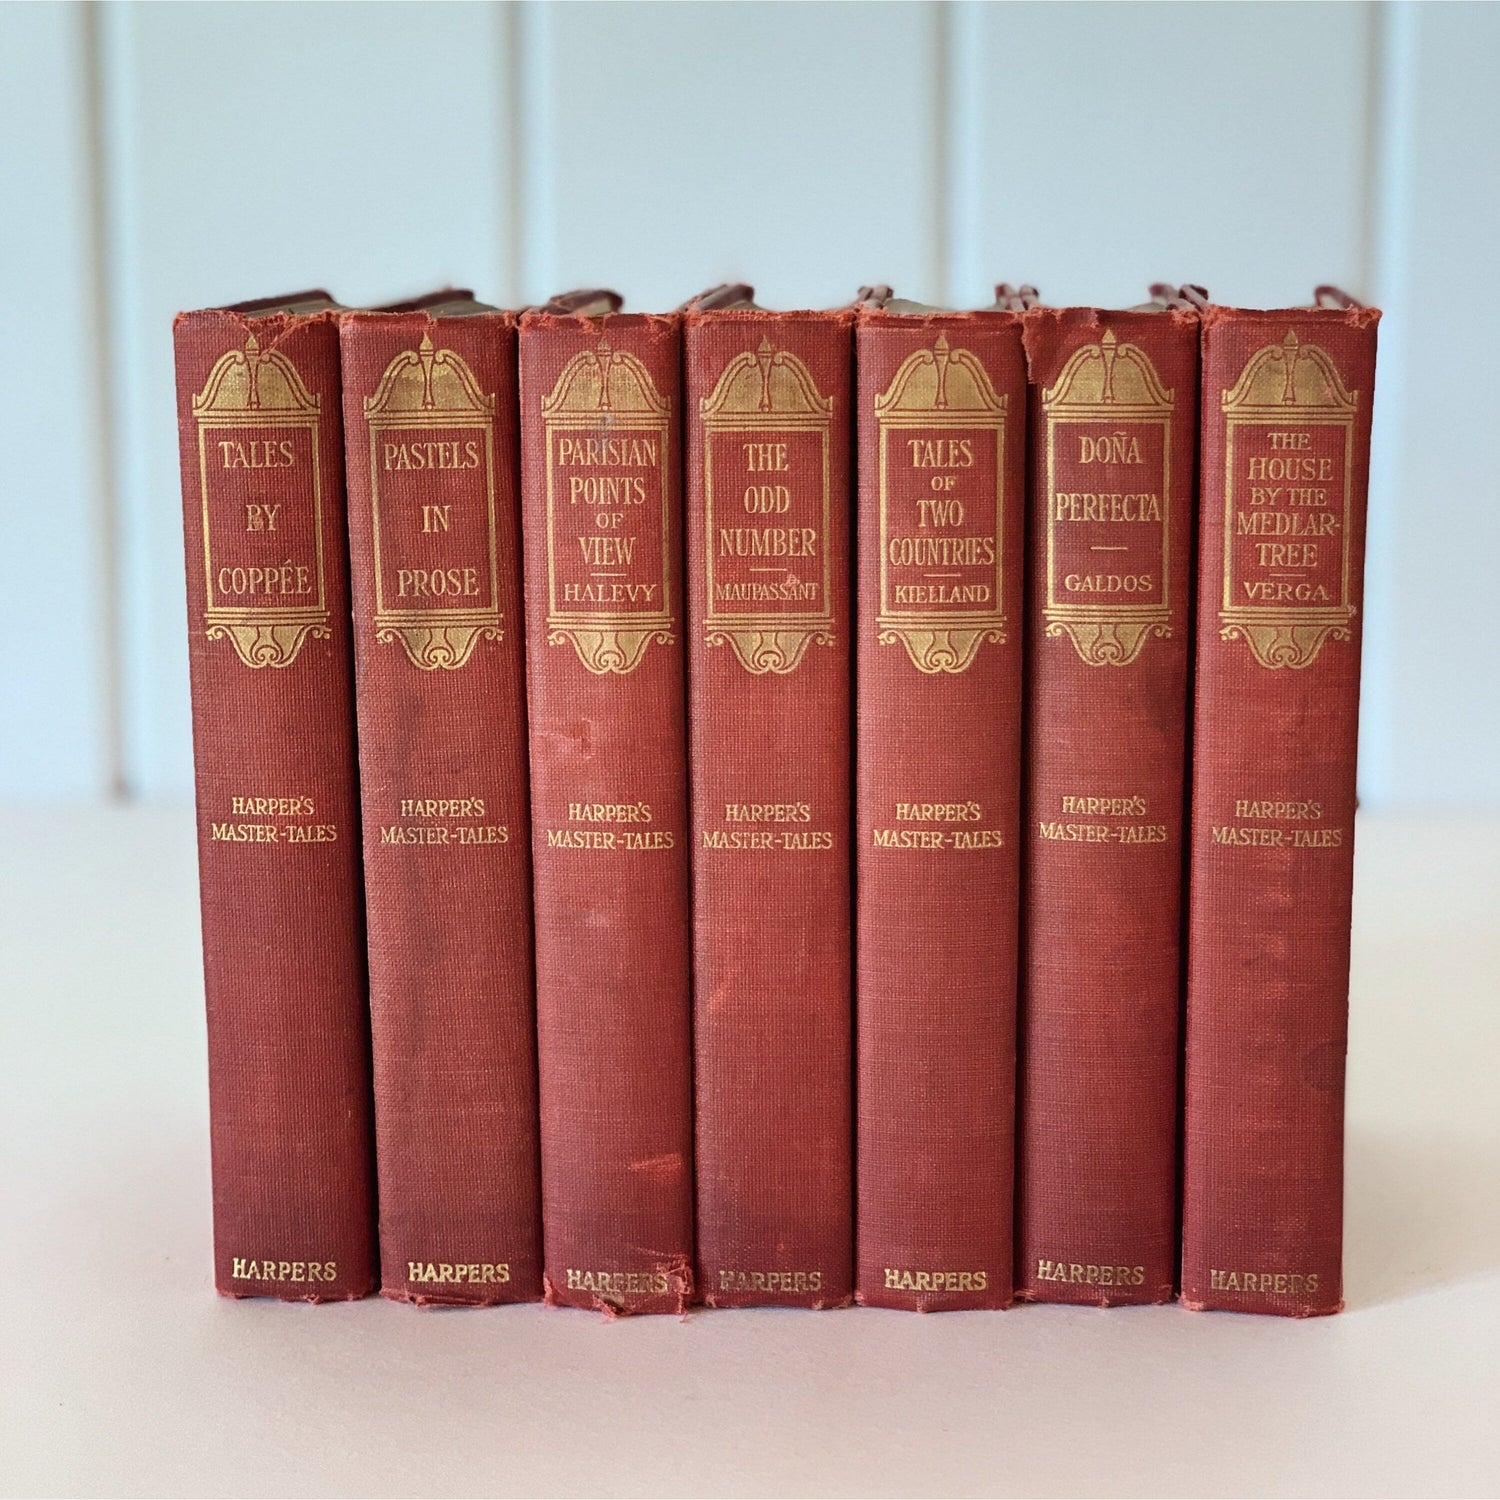 Harper's Master Tales, Small Antique Red Book Set, French Books, Red and Gold 1800s Books for Shelf Styling